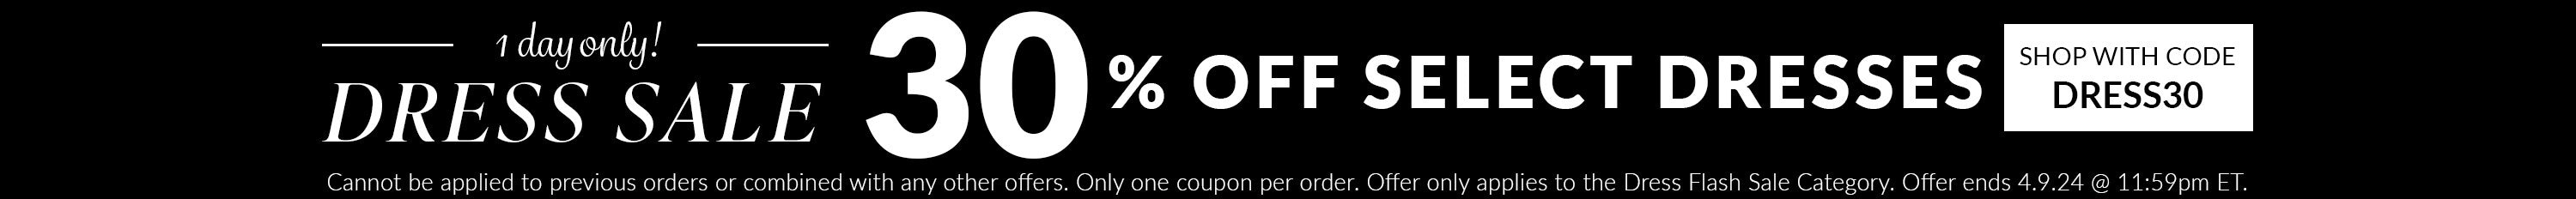 Cannot be applied to previous orders or combined with any other offers. Only one coupon per order. Offer only applies to the Dress Flash Sale Category. Offer ends 4.9.24 @ 11:59pm ET.